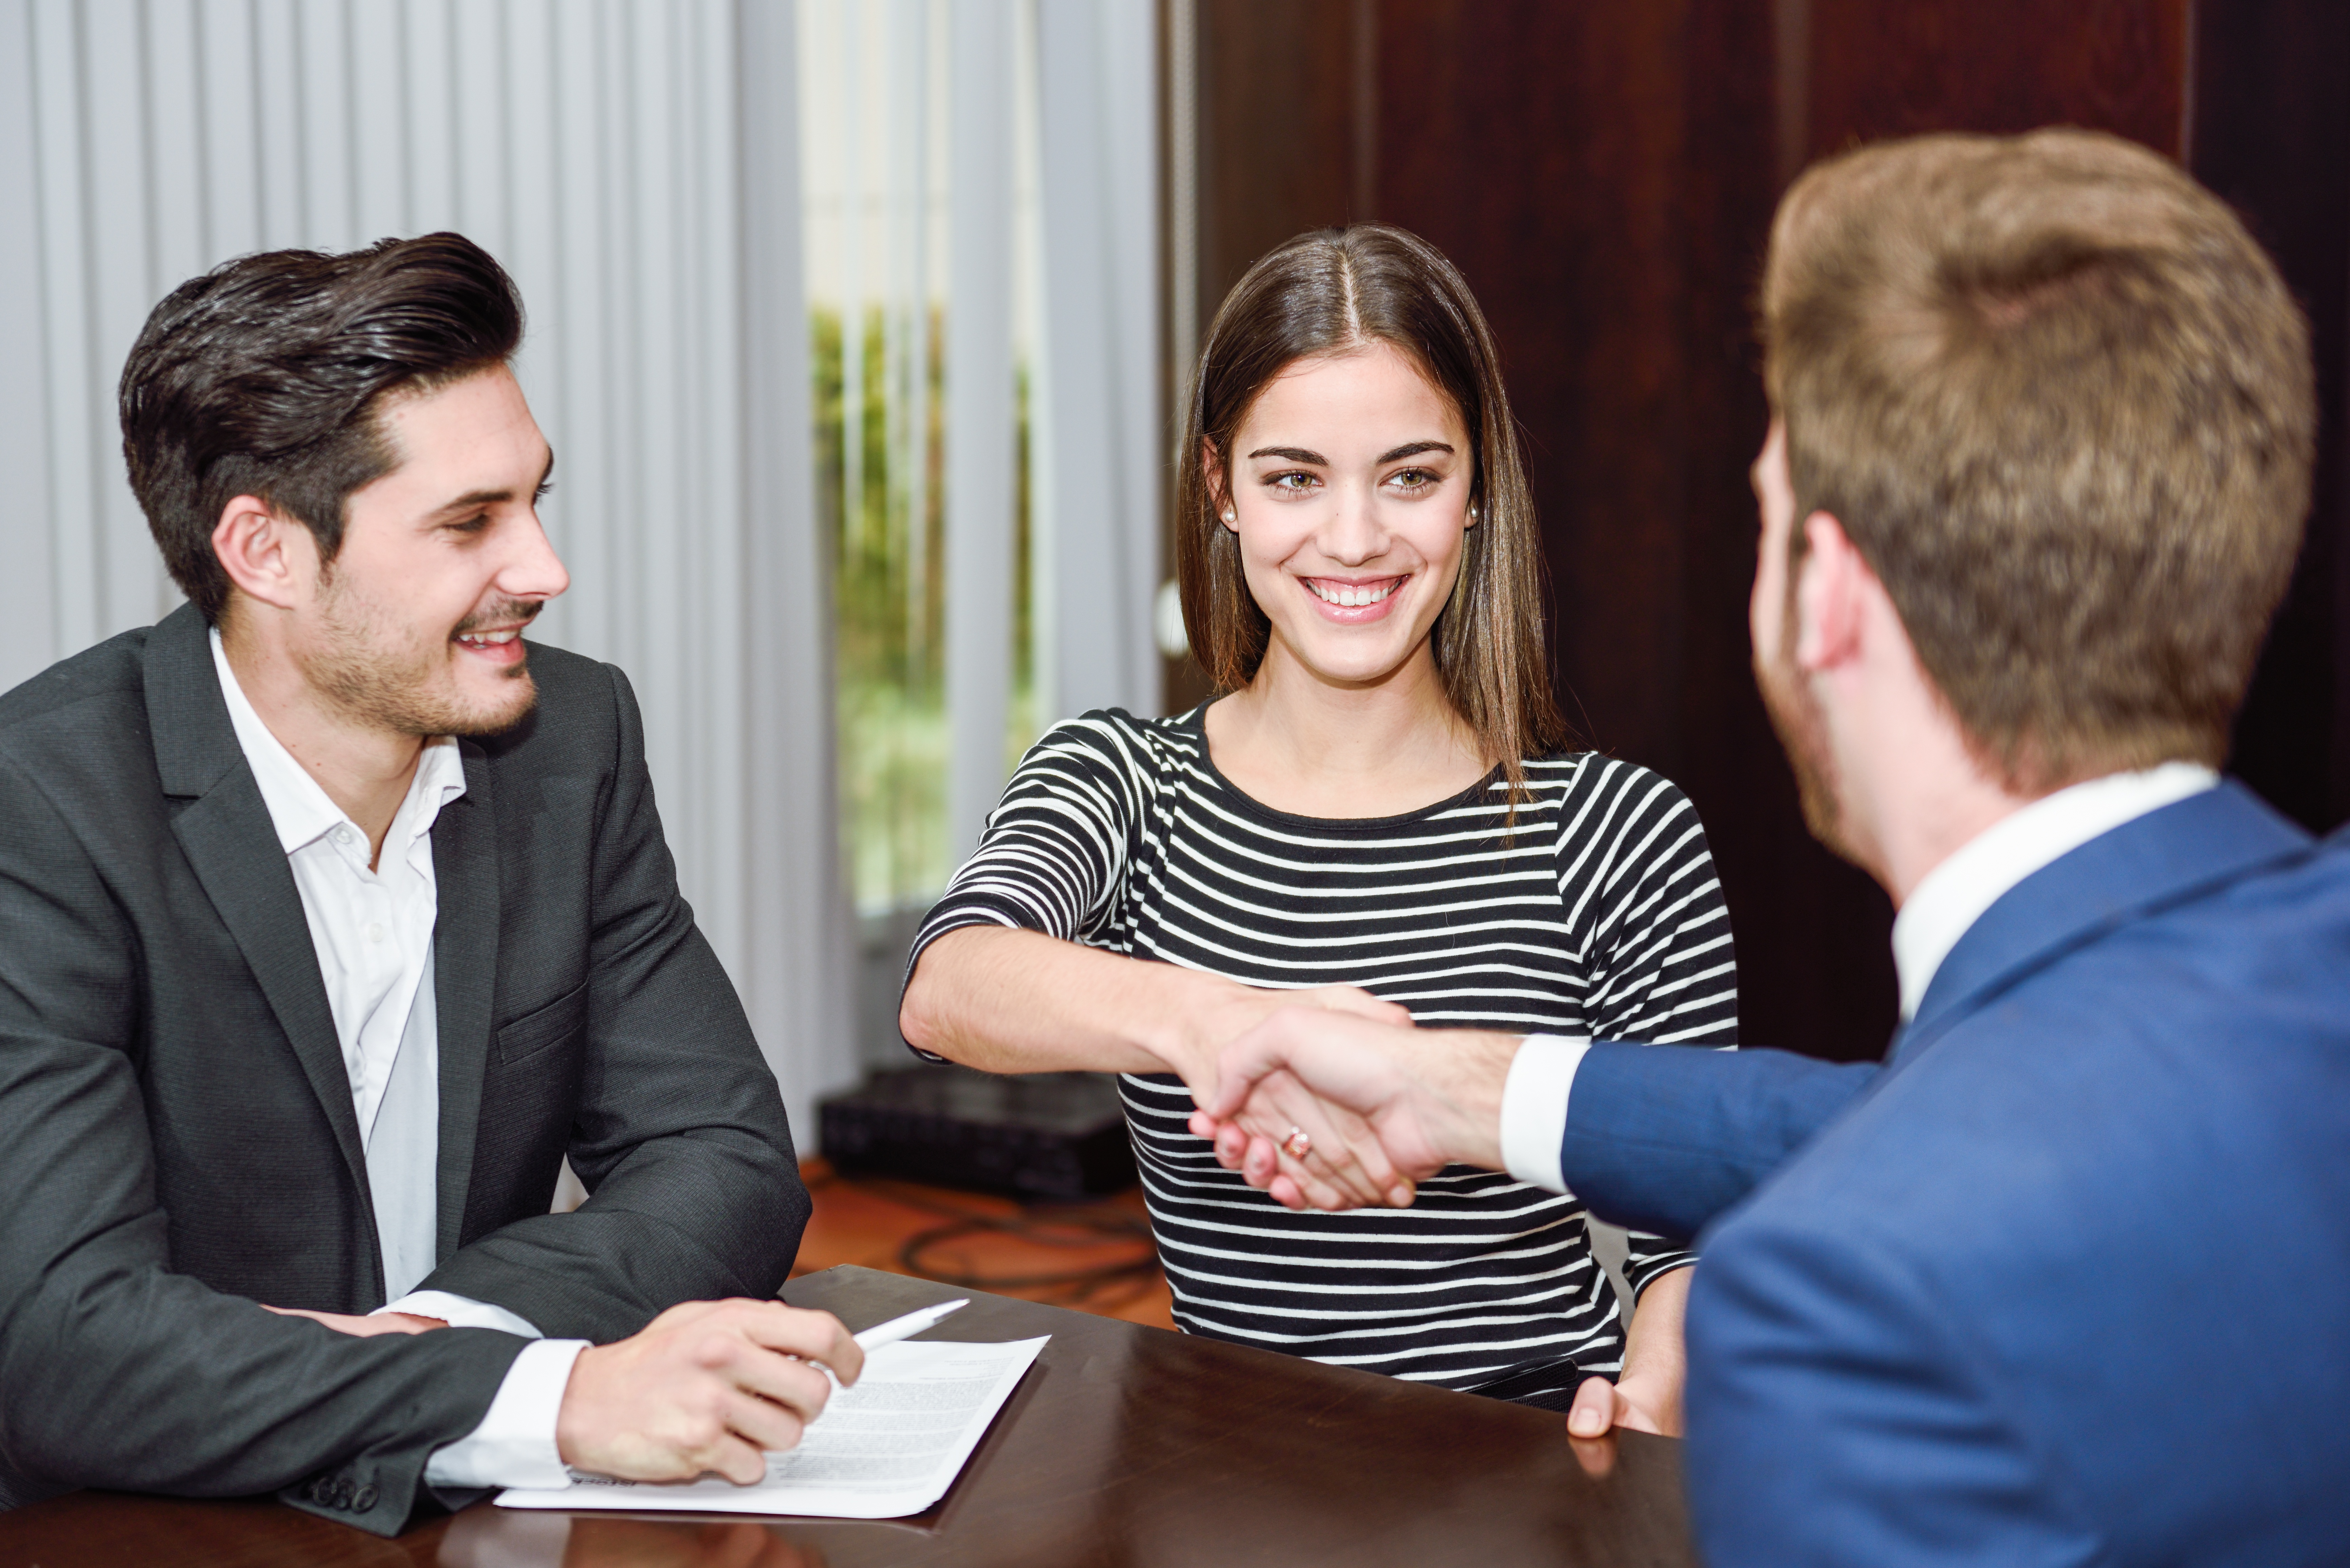 Five Ways to Get Ahead as an Insurance Agent